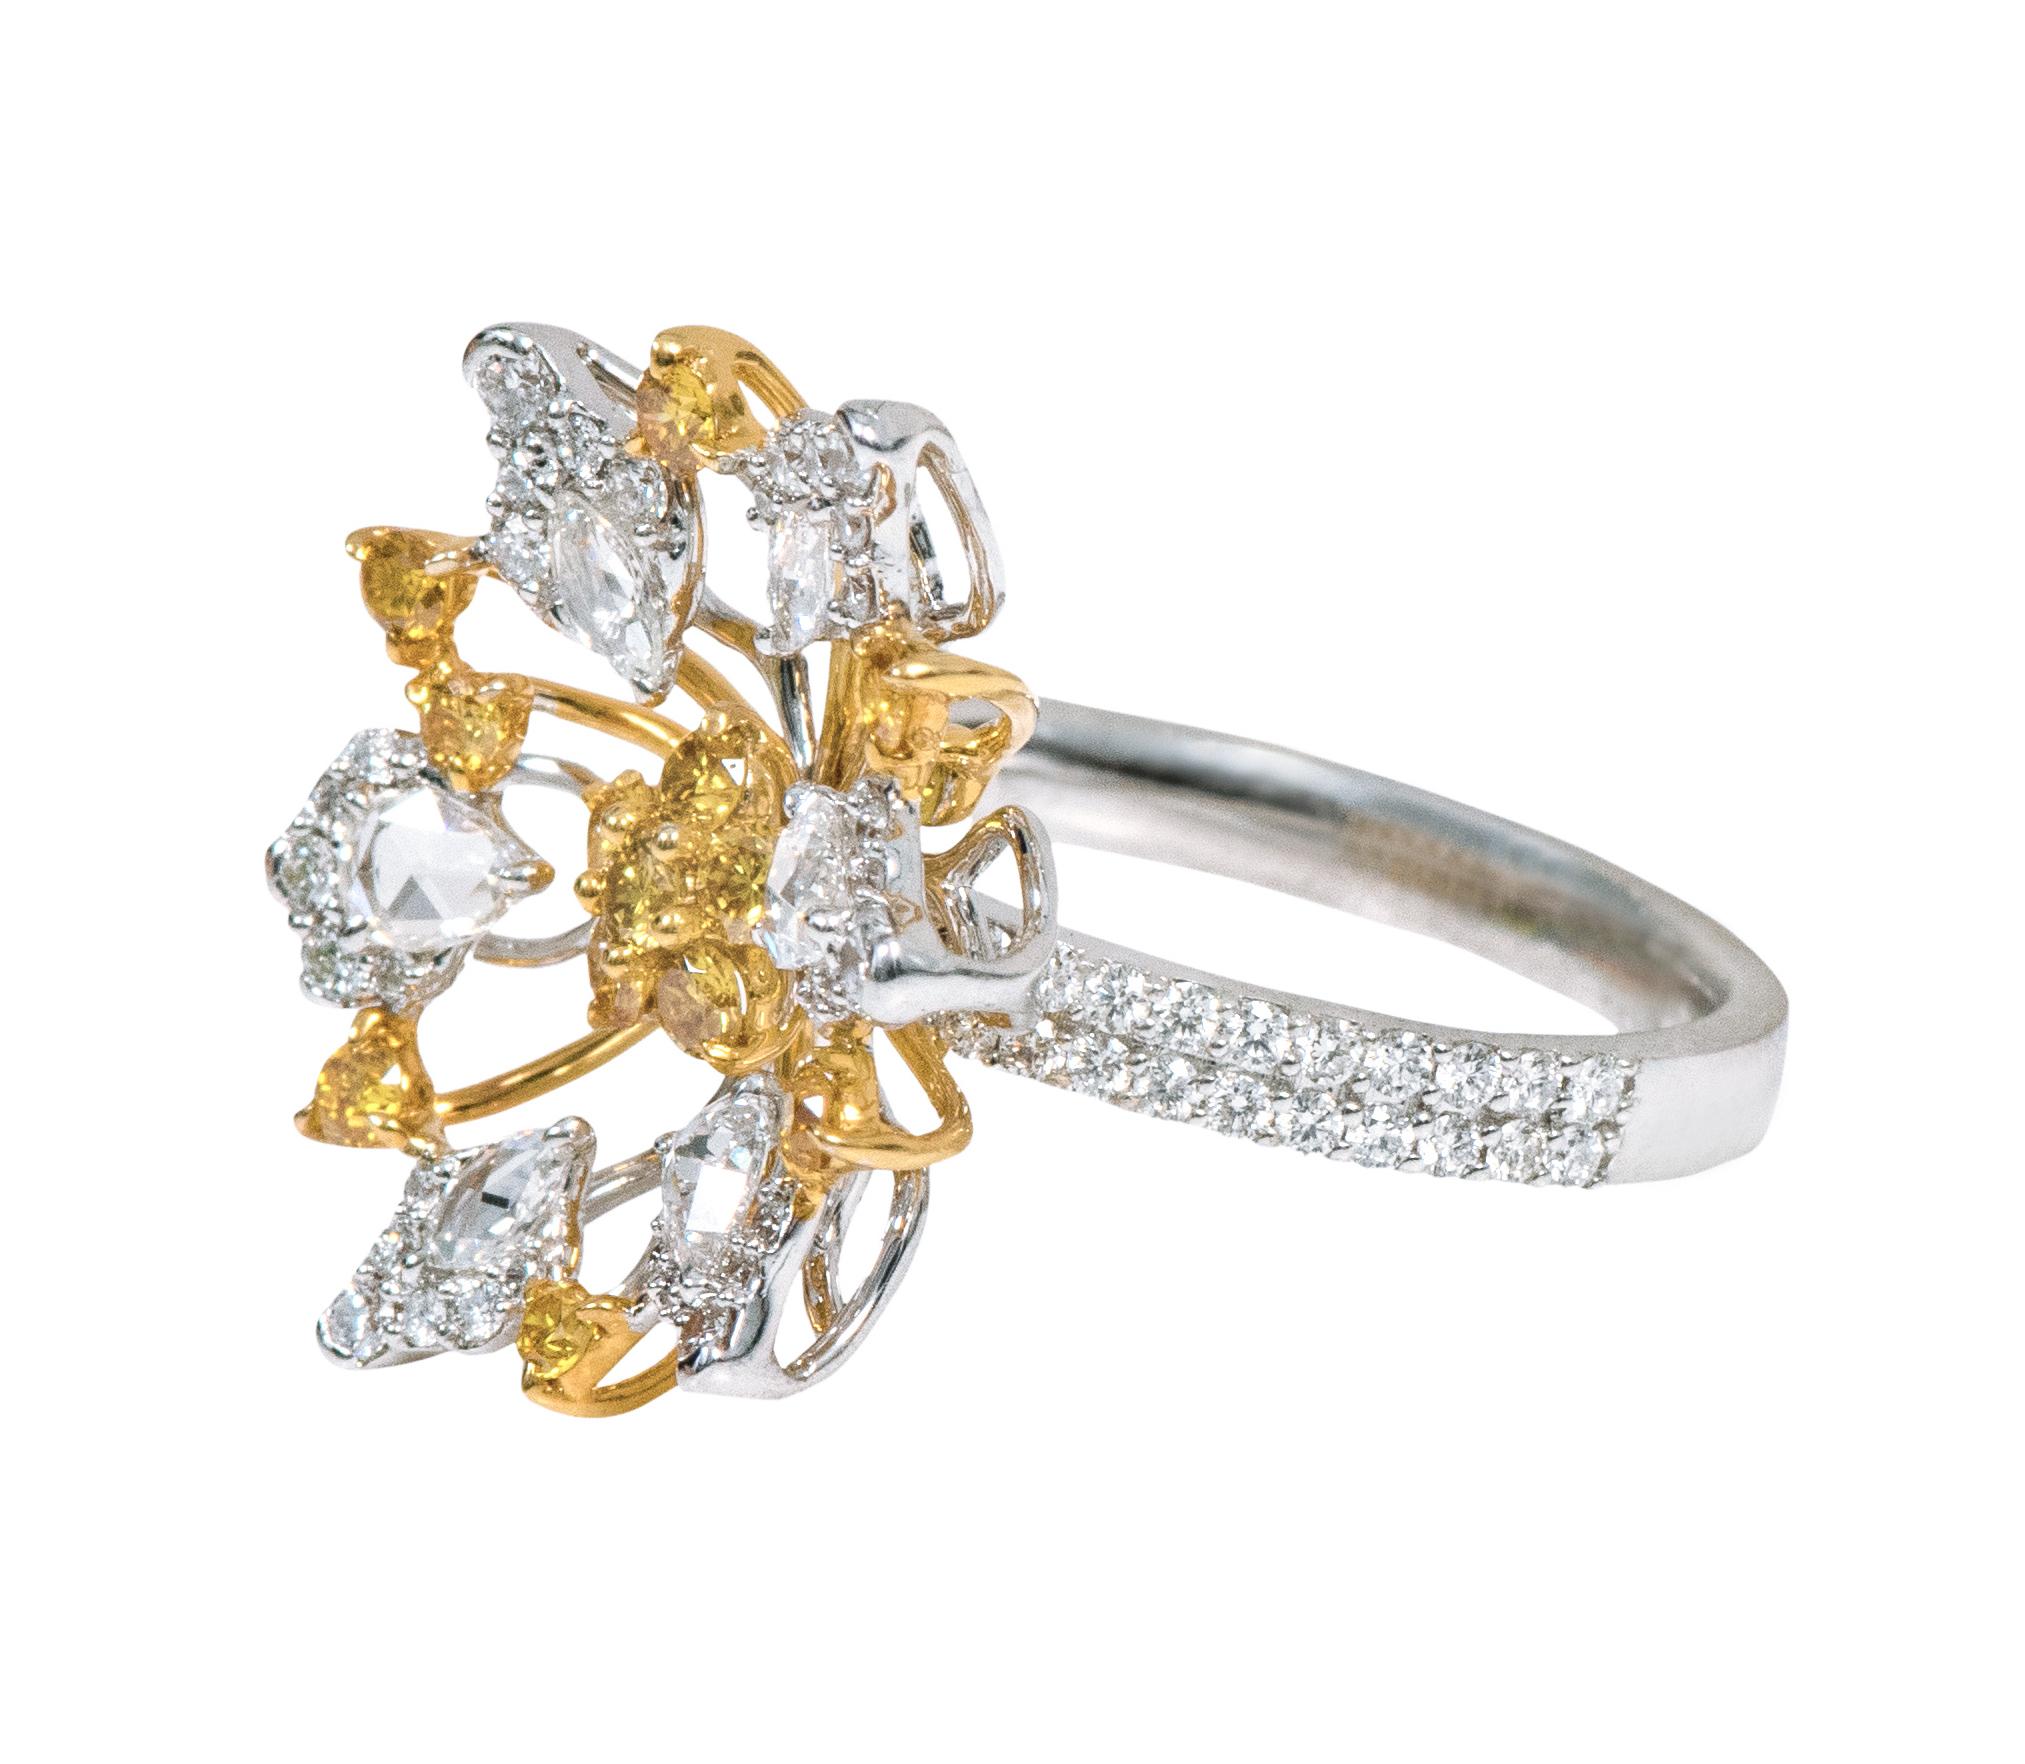 18 Karat Gold 1.62 Carat Yellow and White Diamond Cocktail Ring

This glorious canary yellow and white diamond flower cocktail ring is beyond exemplary. It shows our love for nature and its eminent beauty. The solitaire round canary yellow diamond